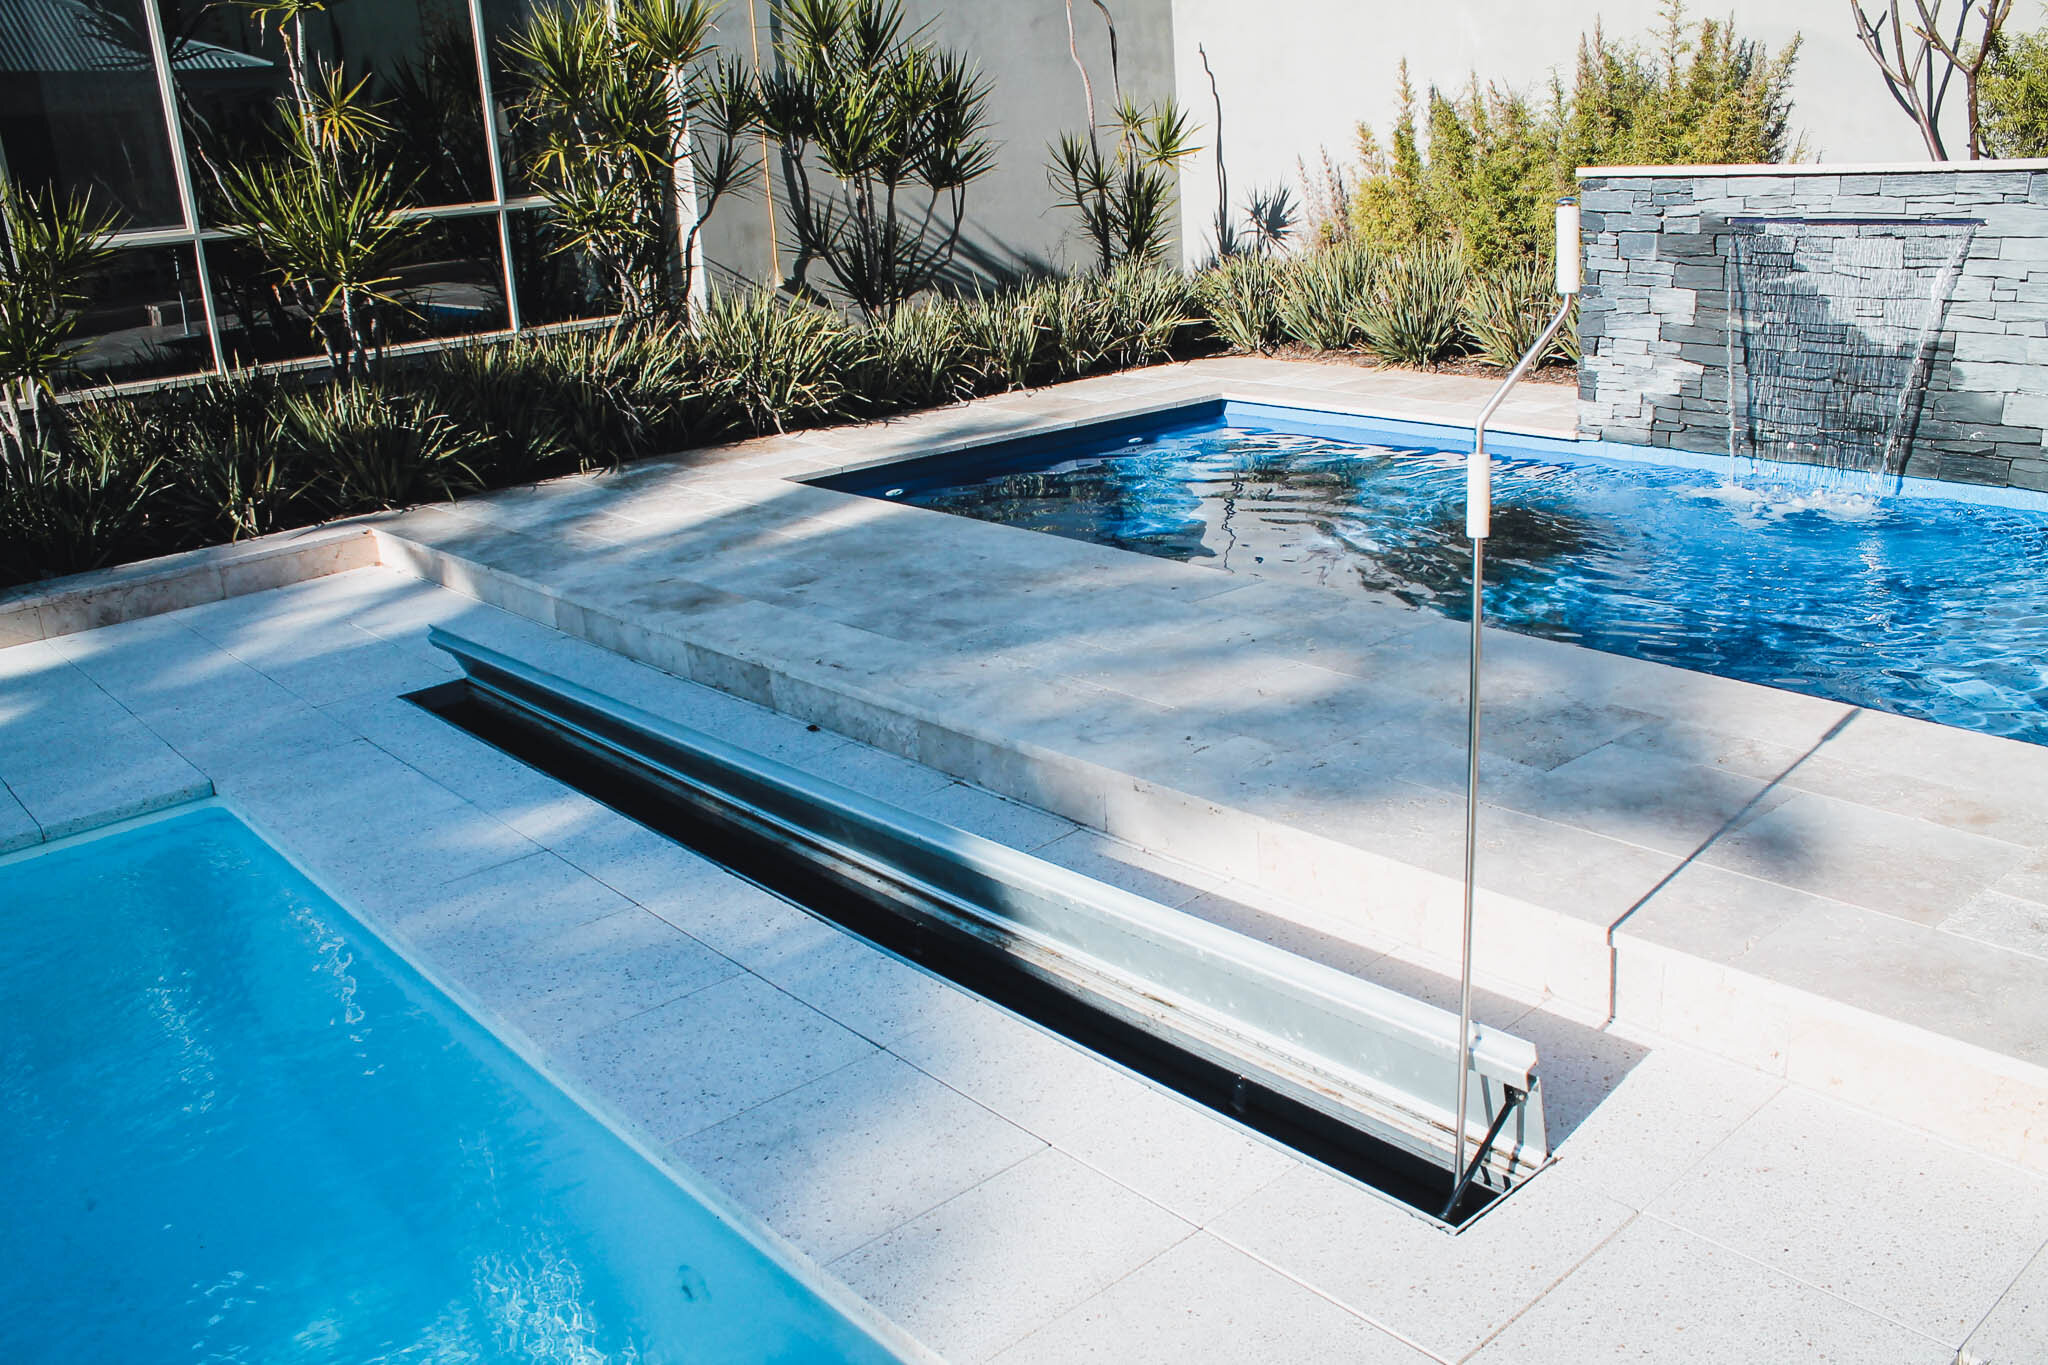 46 Hidden Pool and Covers ideas | hidden pool, pool, swimming pools